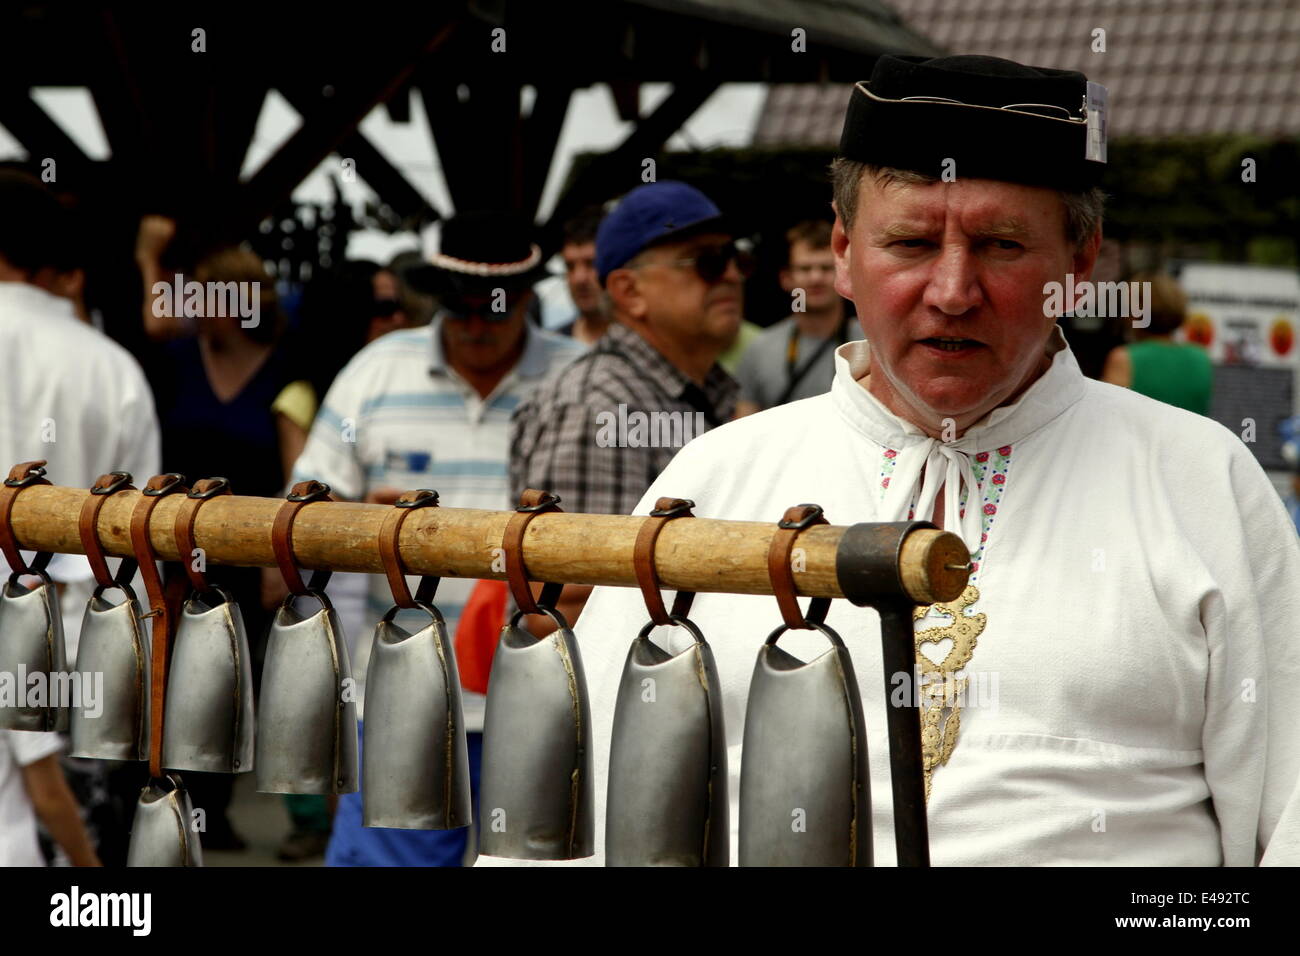 Vychodna, Slovakia. 6th July, 2014. A man presents bells of his own family craft during the Vychodna Folklore Festival in Vychodna, Slovakia, July 6, 2014. The Vychodna Folklore festival was held from Wednesday to Sunday to attract folklorists from Slovakia and neighboring countries. Around 1400 folklore groups appeared on the stages of the festival. Credit:  Erik Adamson/Xinhua/Alamy Live News Stock Photo